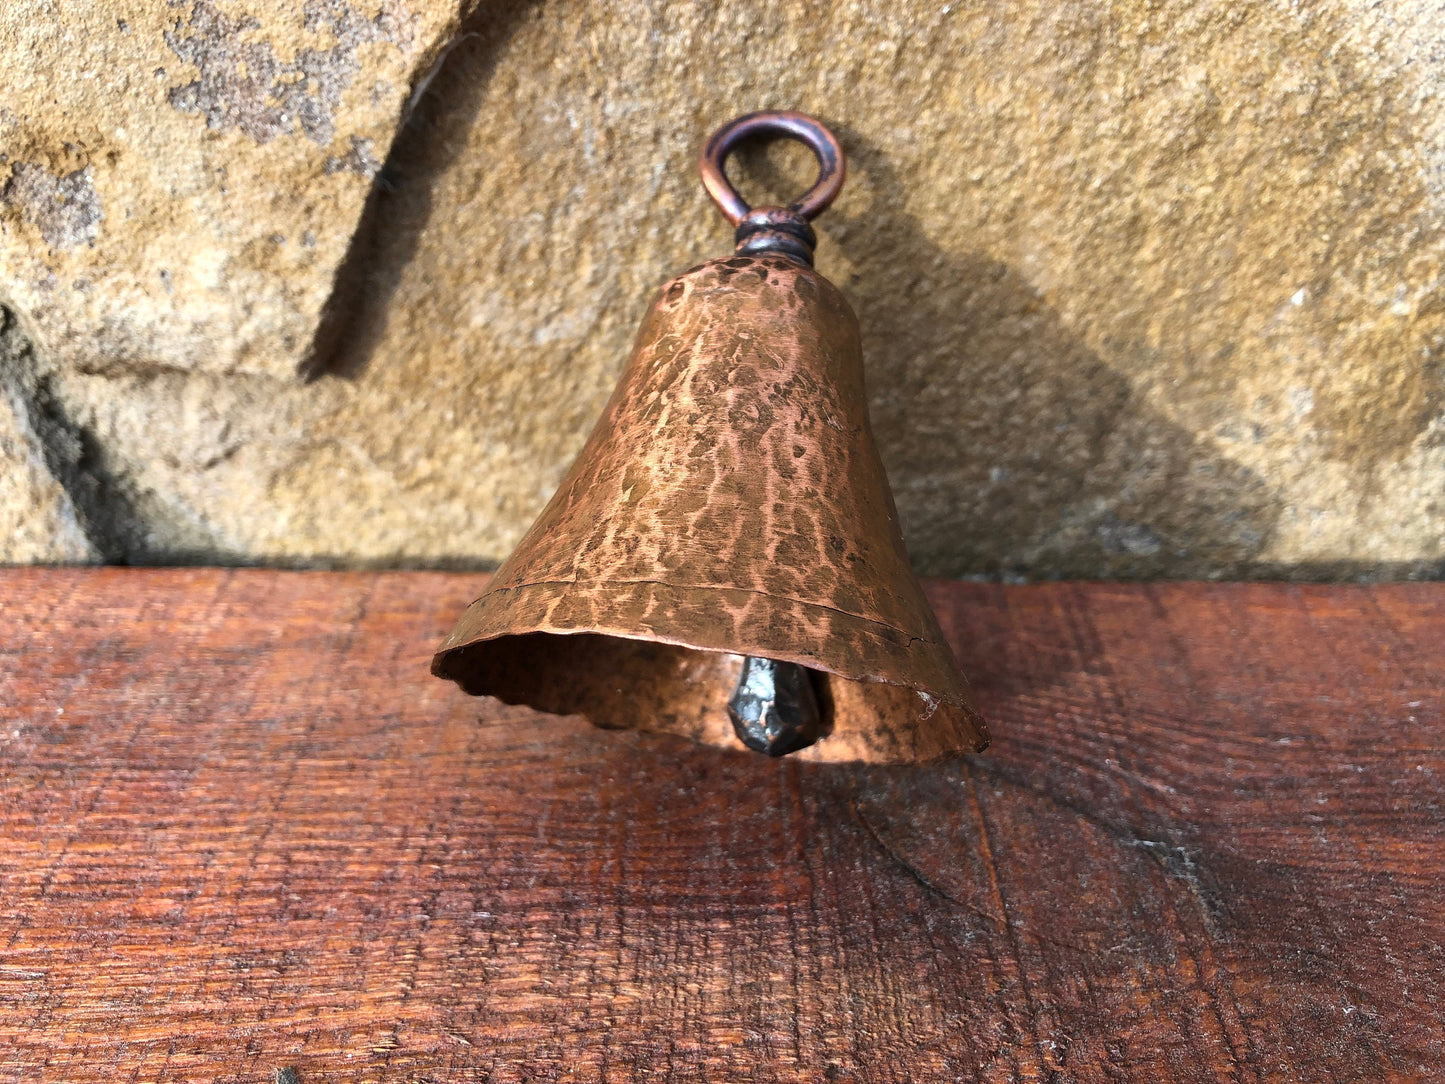 Copper bell, handmade copper bell, hand forged copper bell, Christmas bell, Christmas gift, copper gift, birthday gift, Mother's day gift